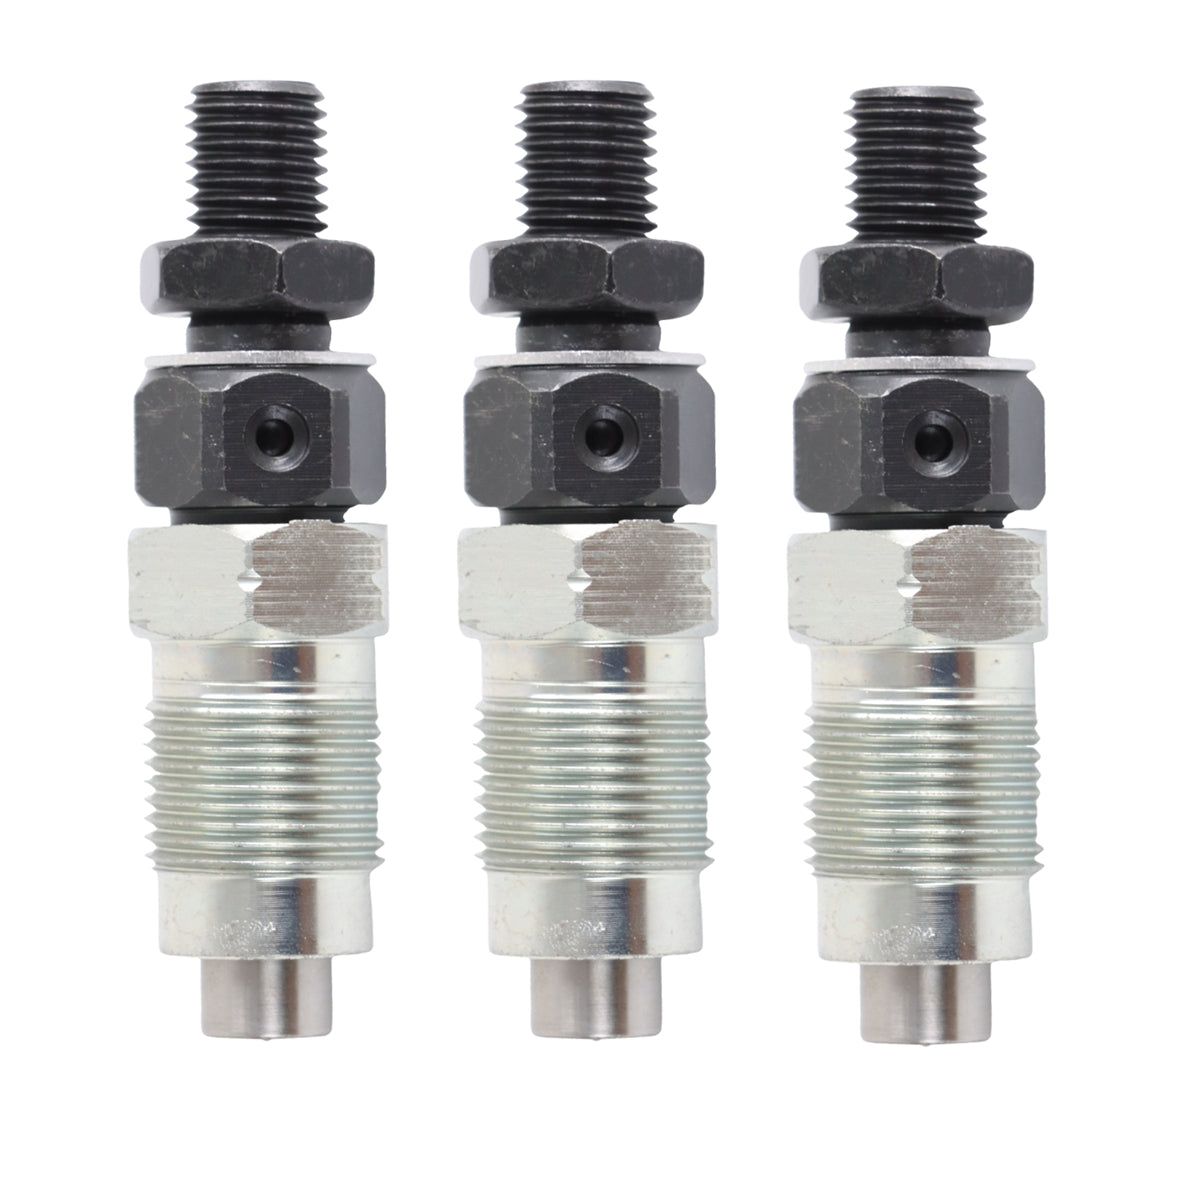 Fuel Injector 16082-53900 16082-53903 for Kubota, Daysyore Fuel Injector, Car Fuel Injector, Auto Fuel Injector